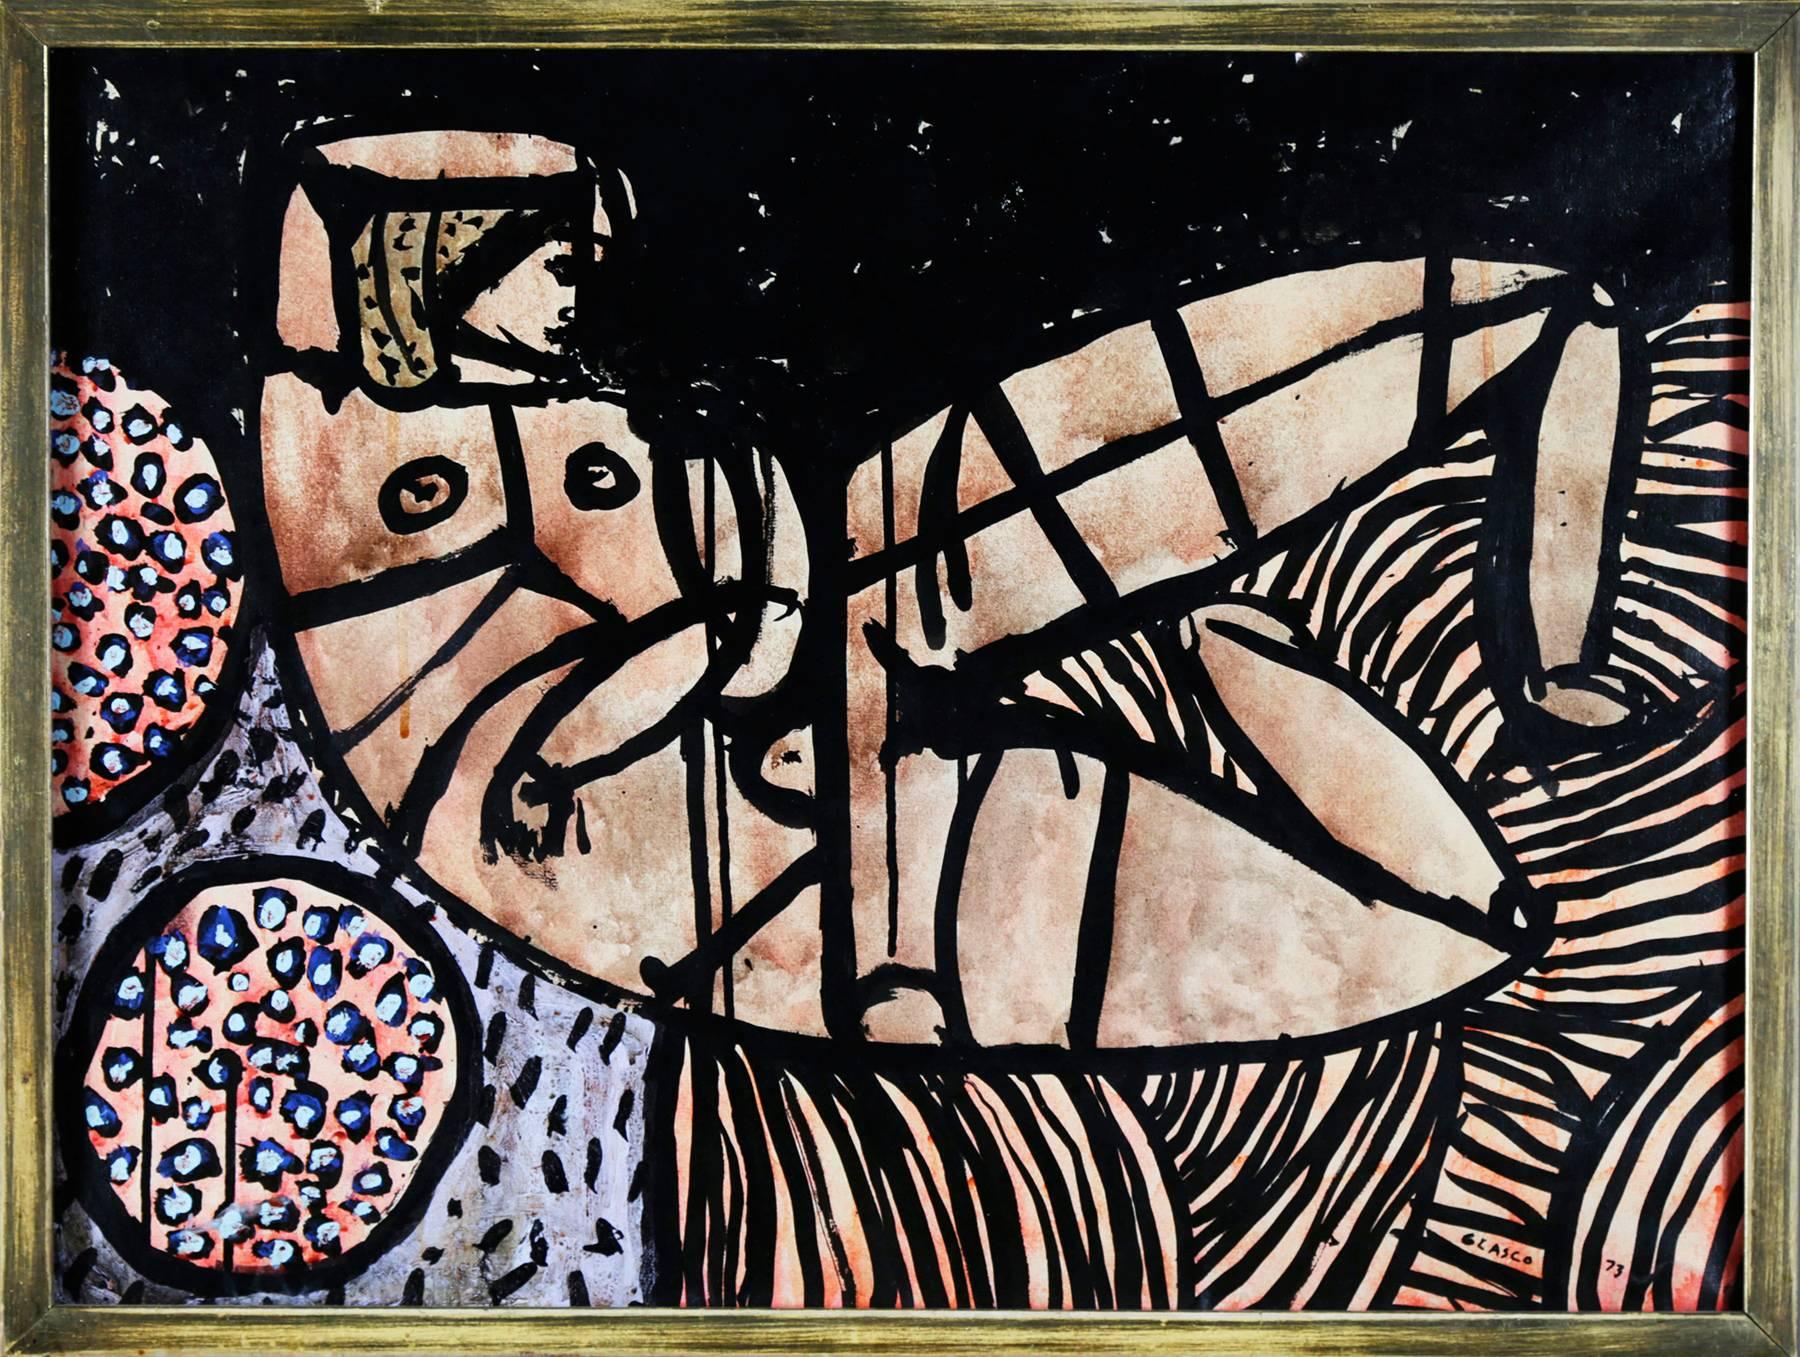 Reclining Nude, 1973 - Black Figurative Painting by Joseph Glasco